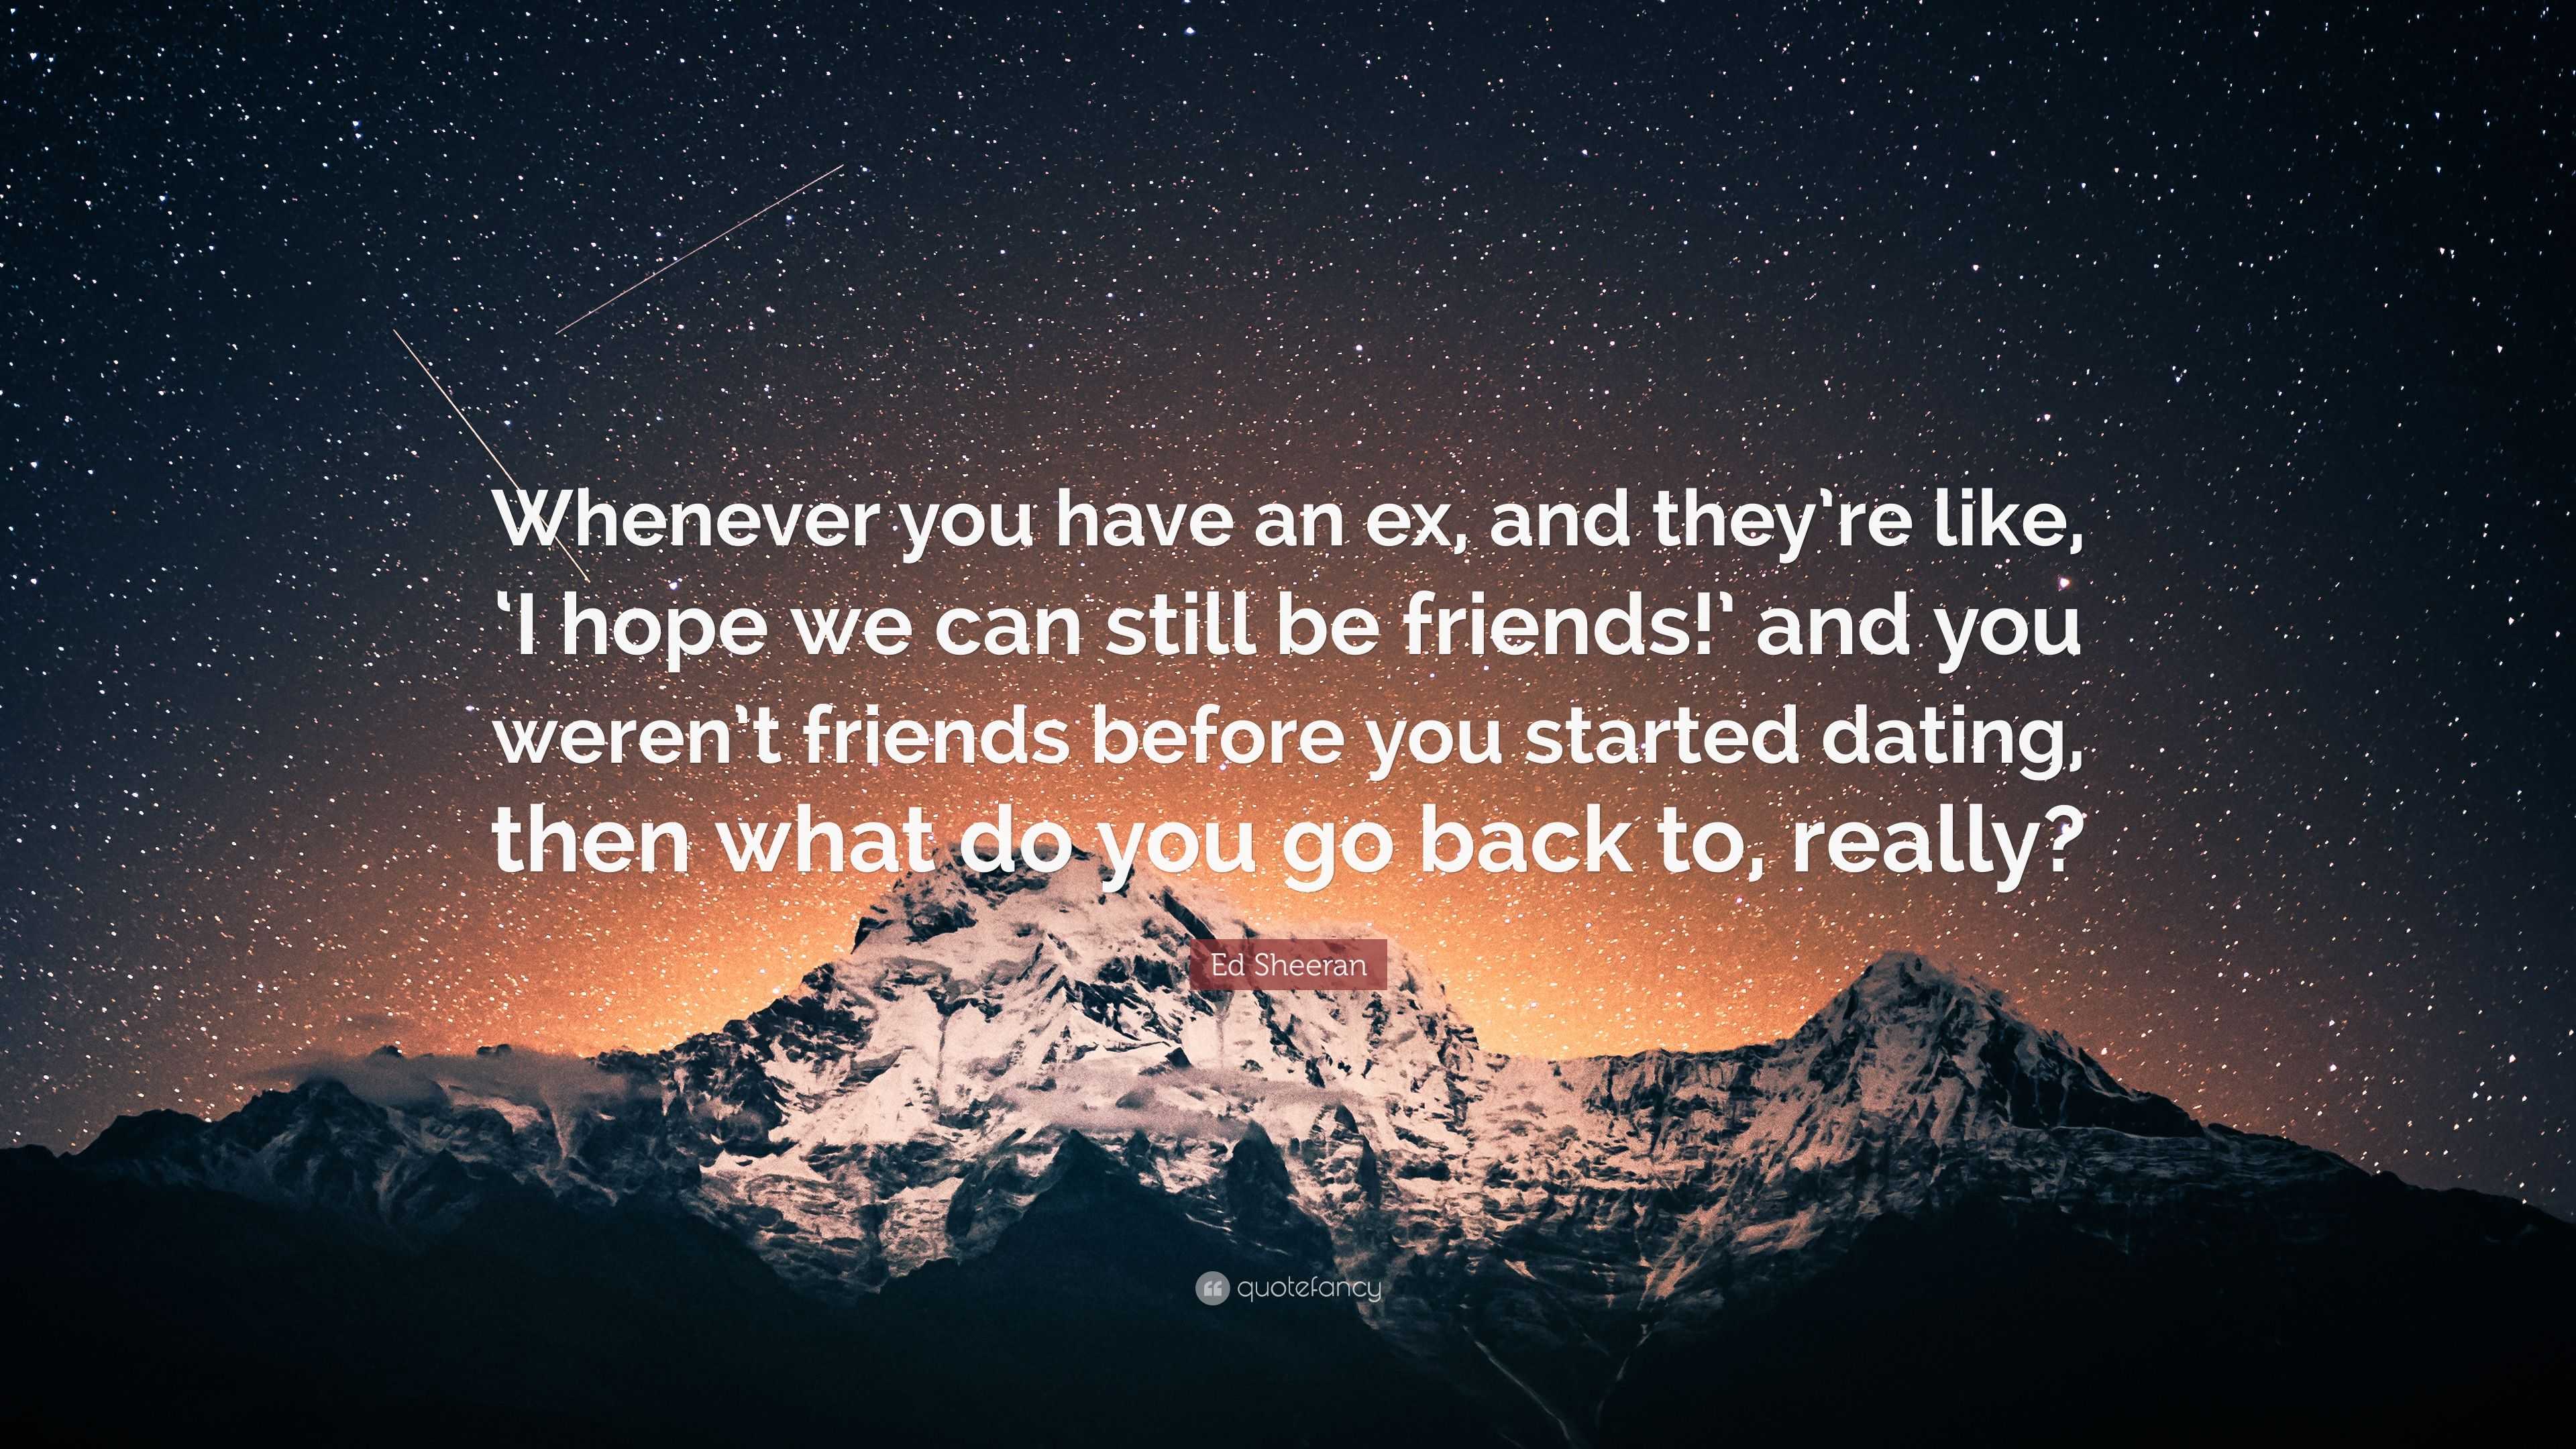 Ed Sheeran Quote: “Whenever you have an ex, and they’re like, ‘I hope ...